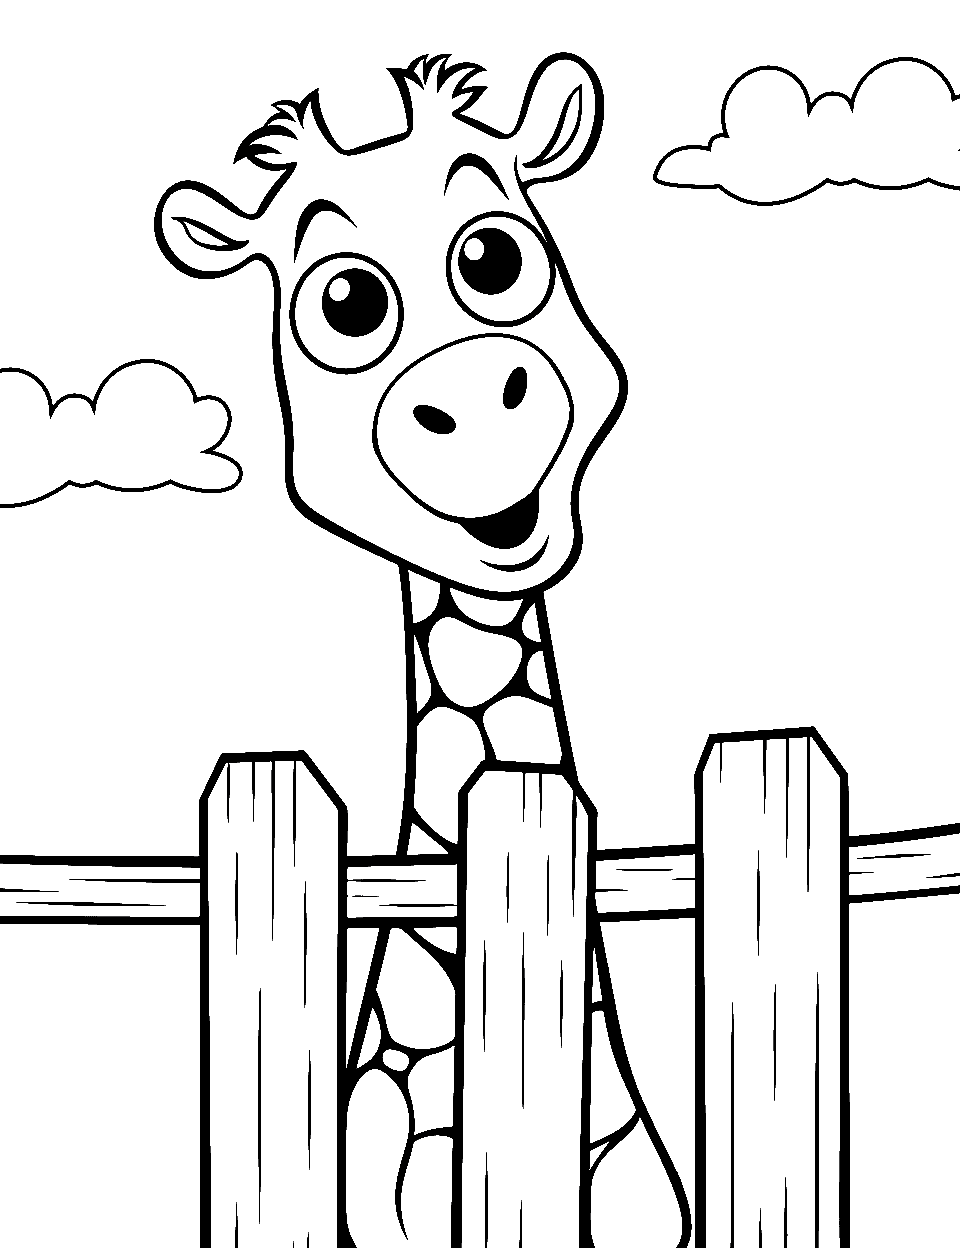 Zany Zoo Coloring Page - A giraffe in zoo looking happy over the fence.